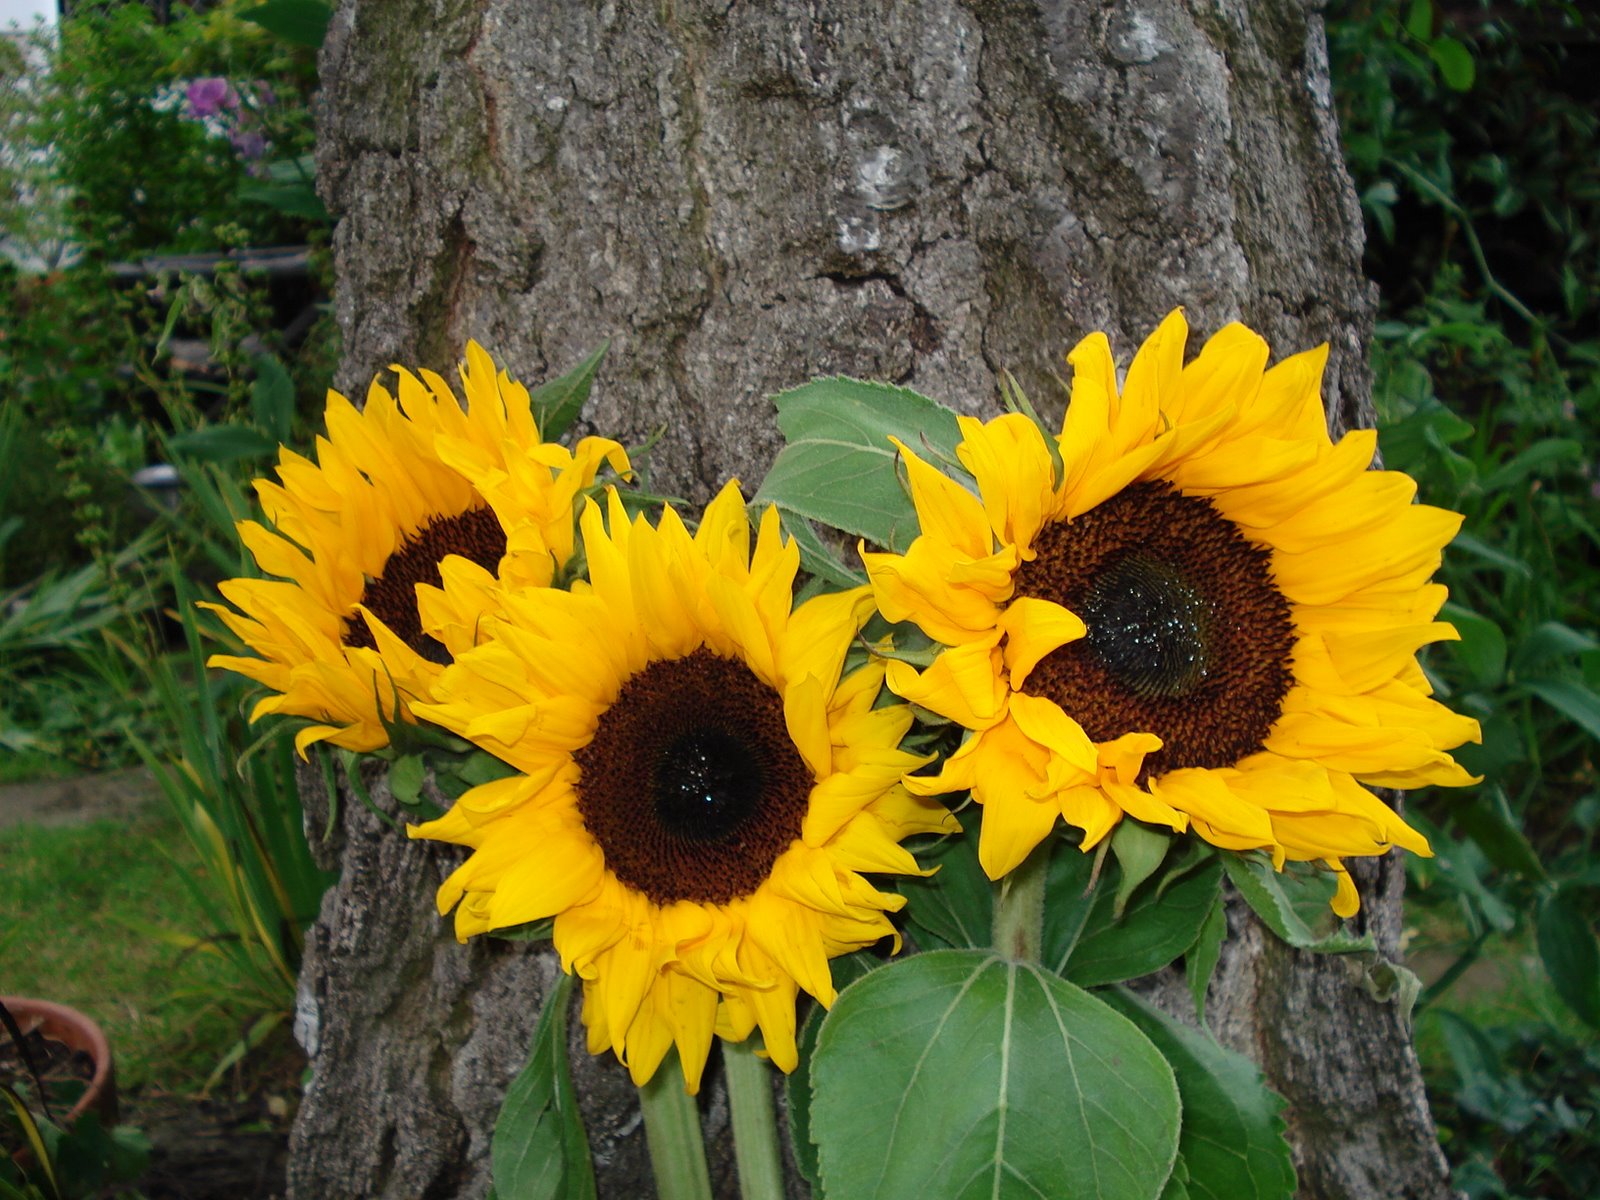 [The+Silver+Birch+and+the+Sunflowers006.jpg]